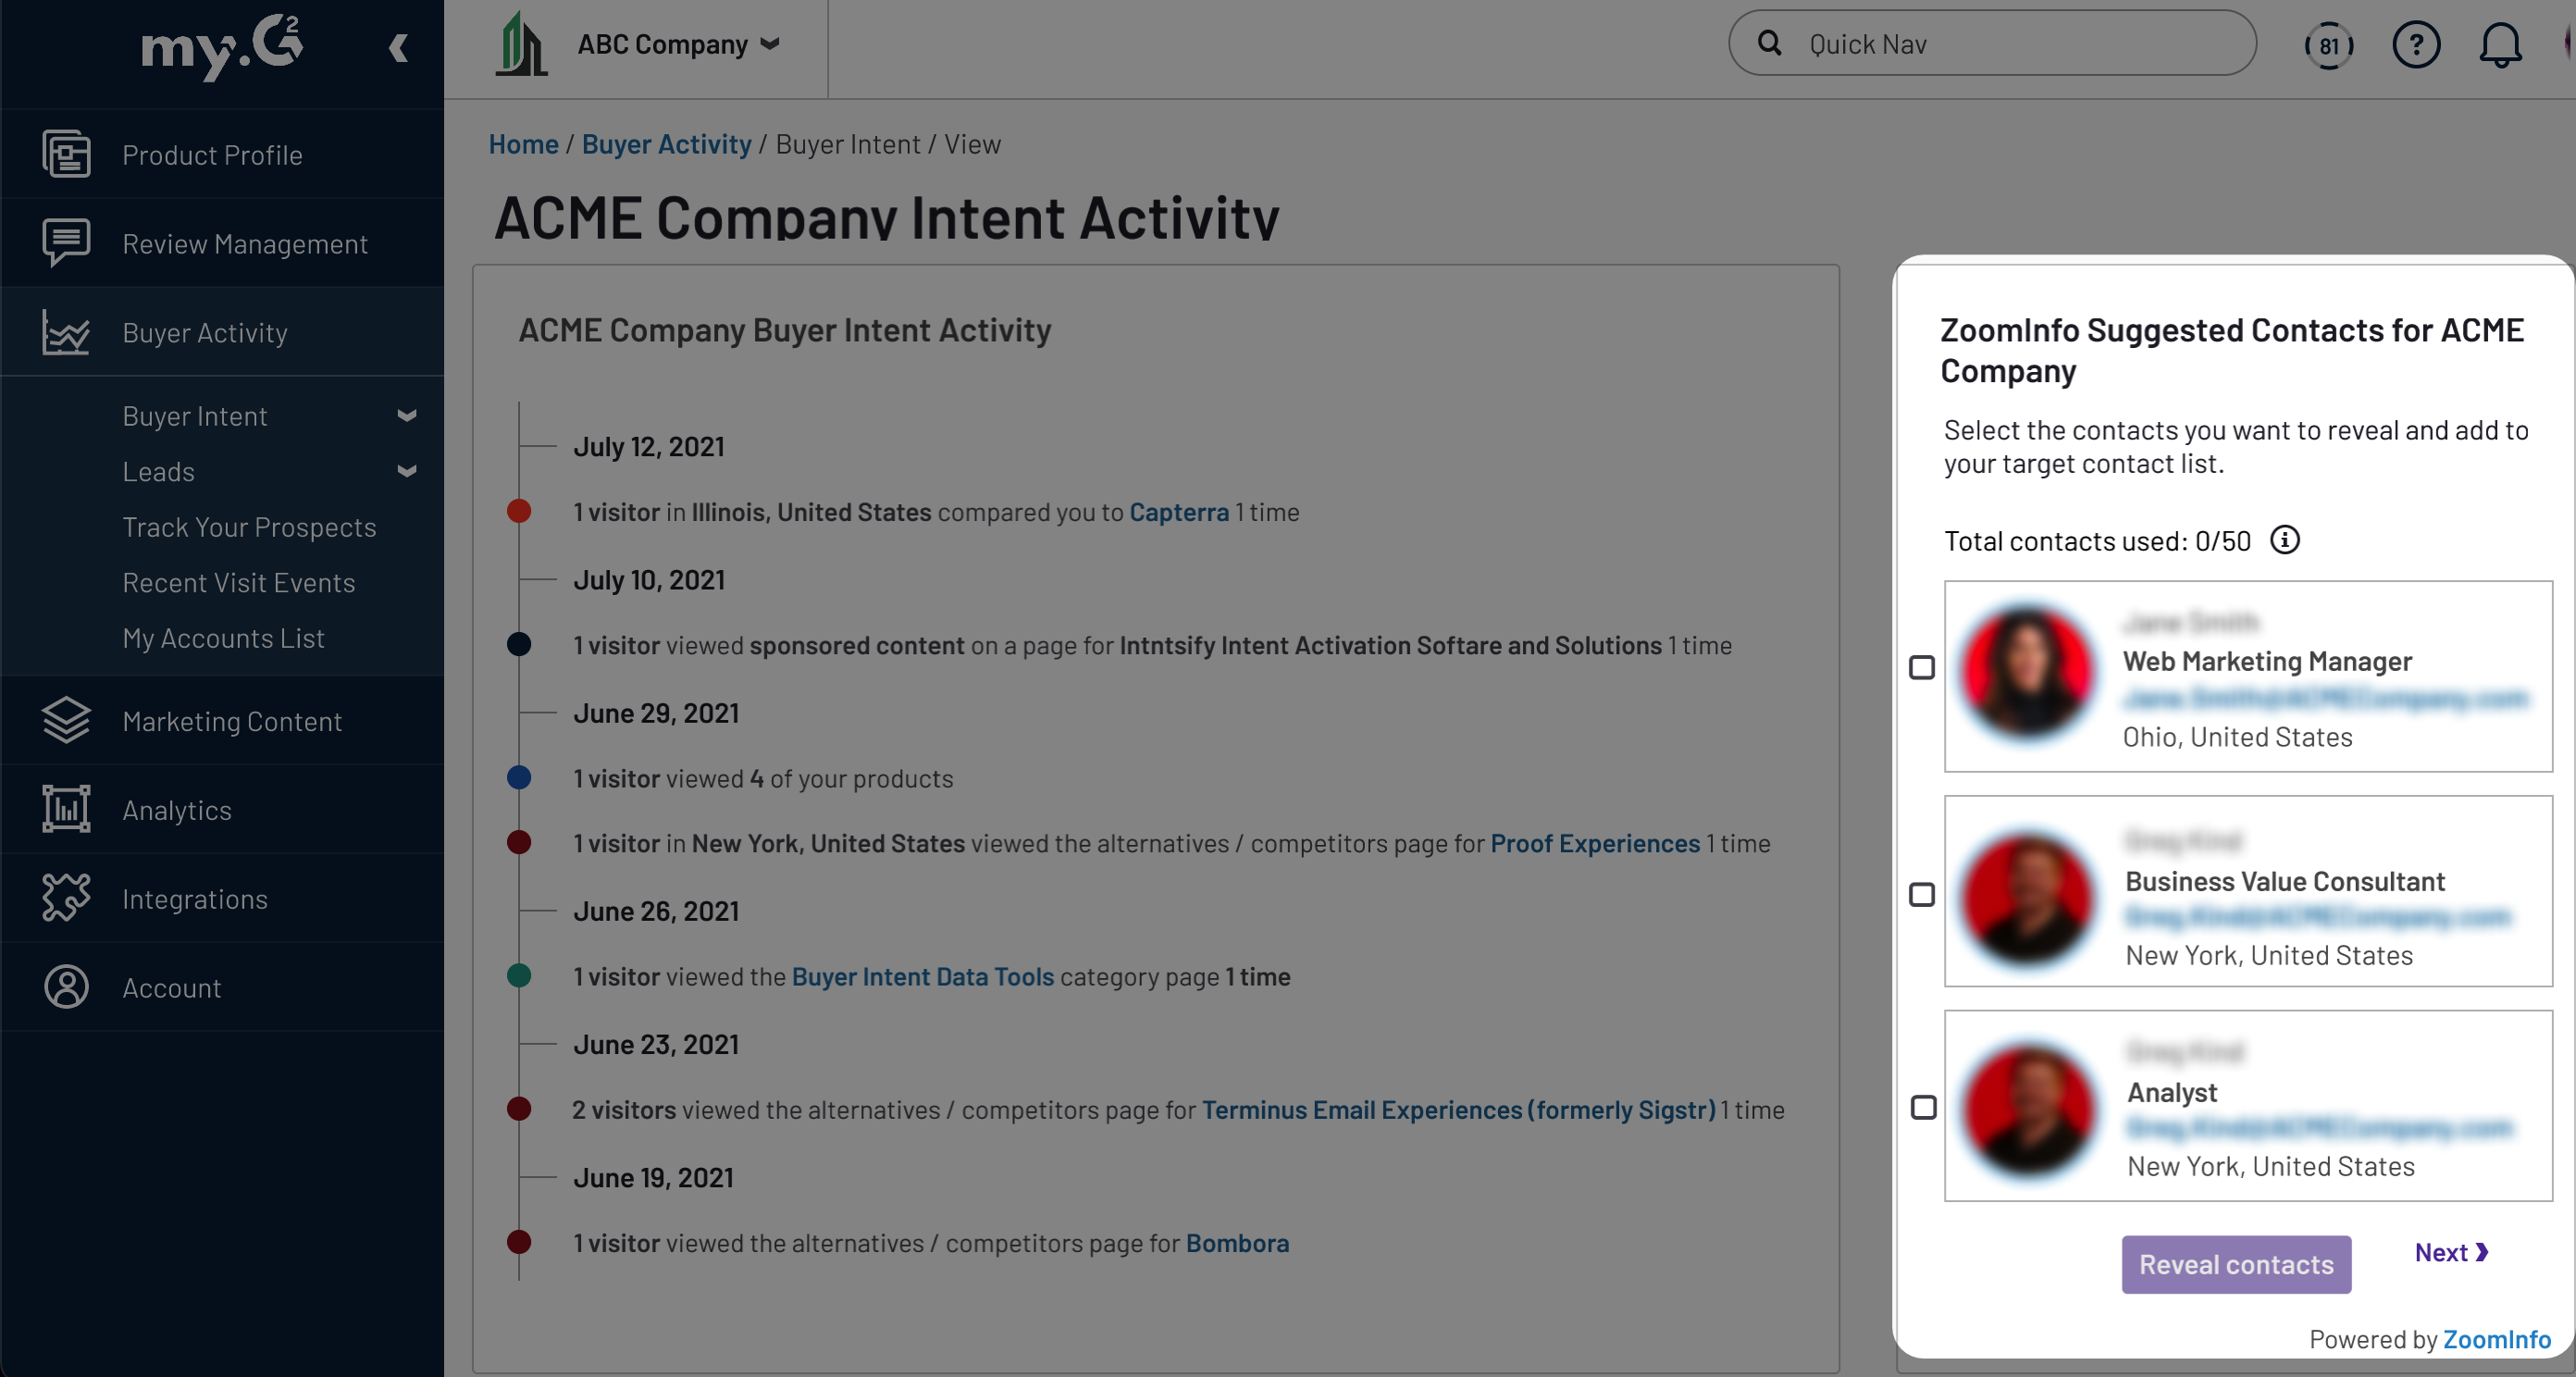 image of suggested contacts on the buyer intent activity page